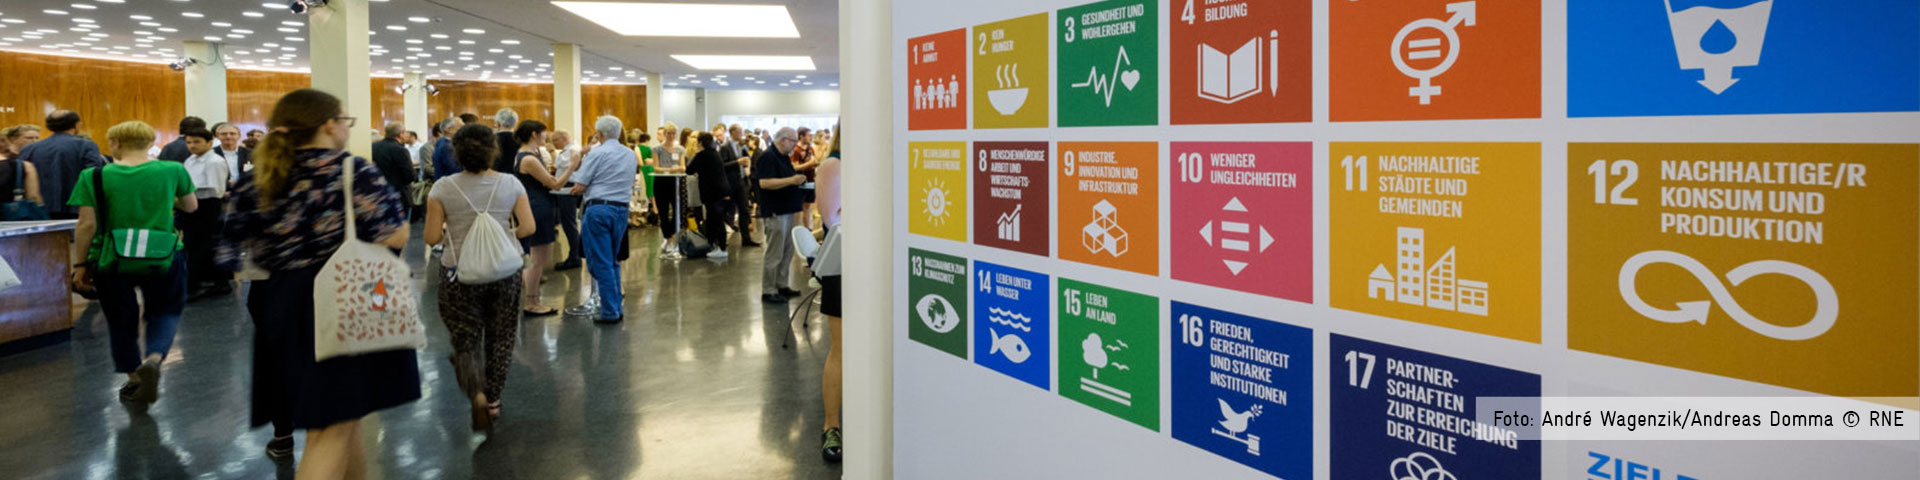 People at a conference walking and standing at the entrance of a building. On one side there is a wall displaying the 17 Sustainable Development Goals. Photo: André Wagenzik/Andreas Domma © RNE